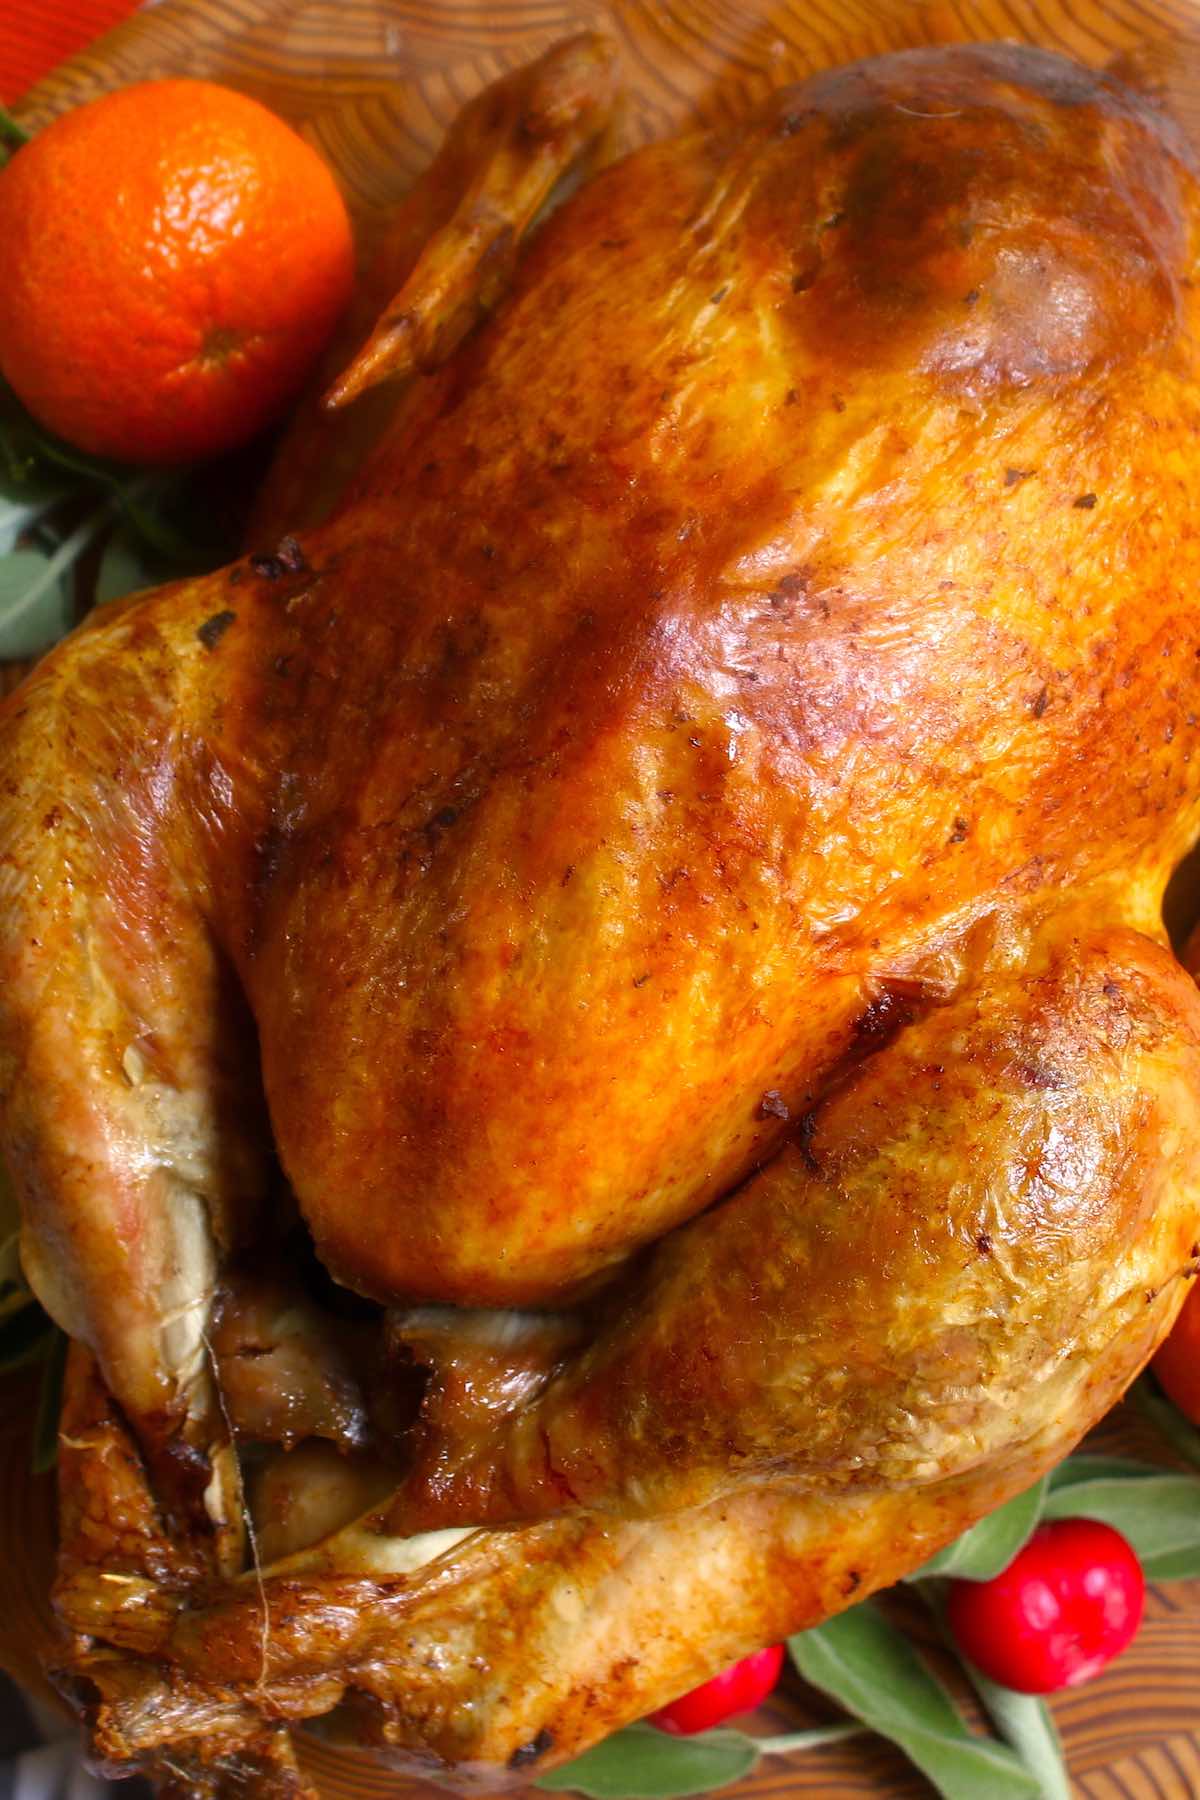 Learn how long to cook a turkey and get a perfectly cooked bird for your Thanksgiving or Christmas dinner! The rule of thumb is 15 minutes per pound, but turkey cooking time also depends on oven temperature, whether it’s stuffed or unstuffed, and thawed vs. frozen. 